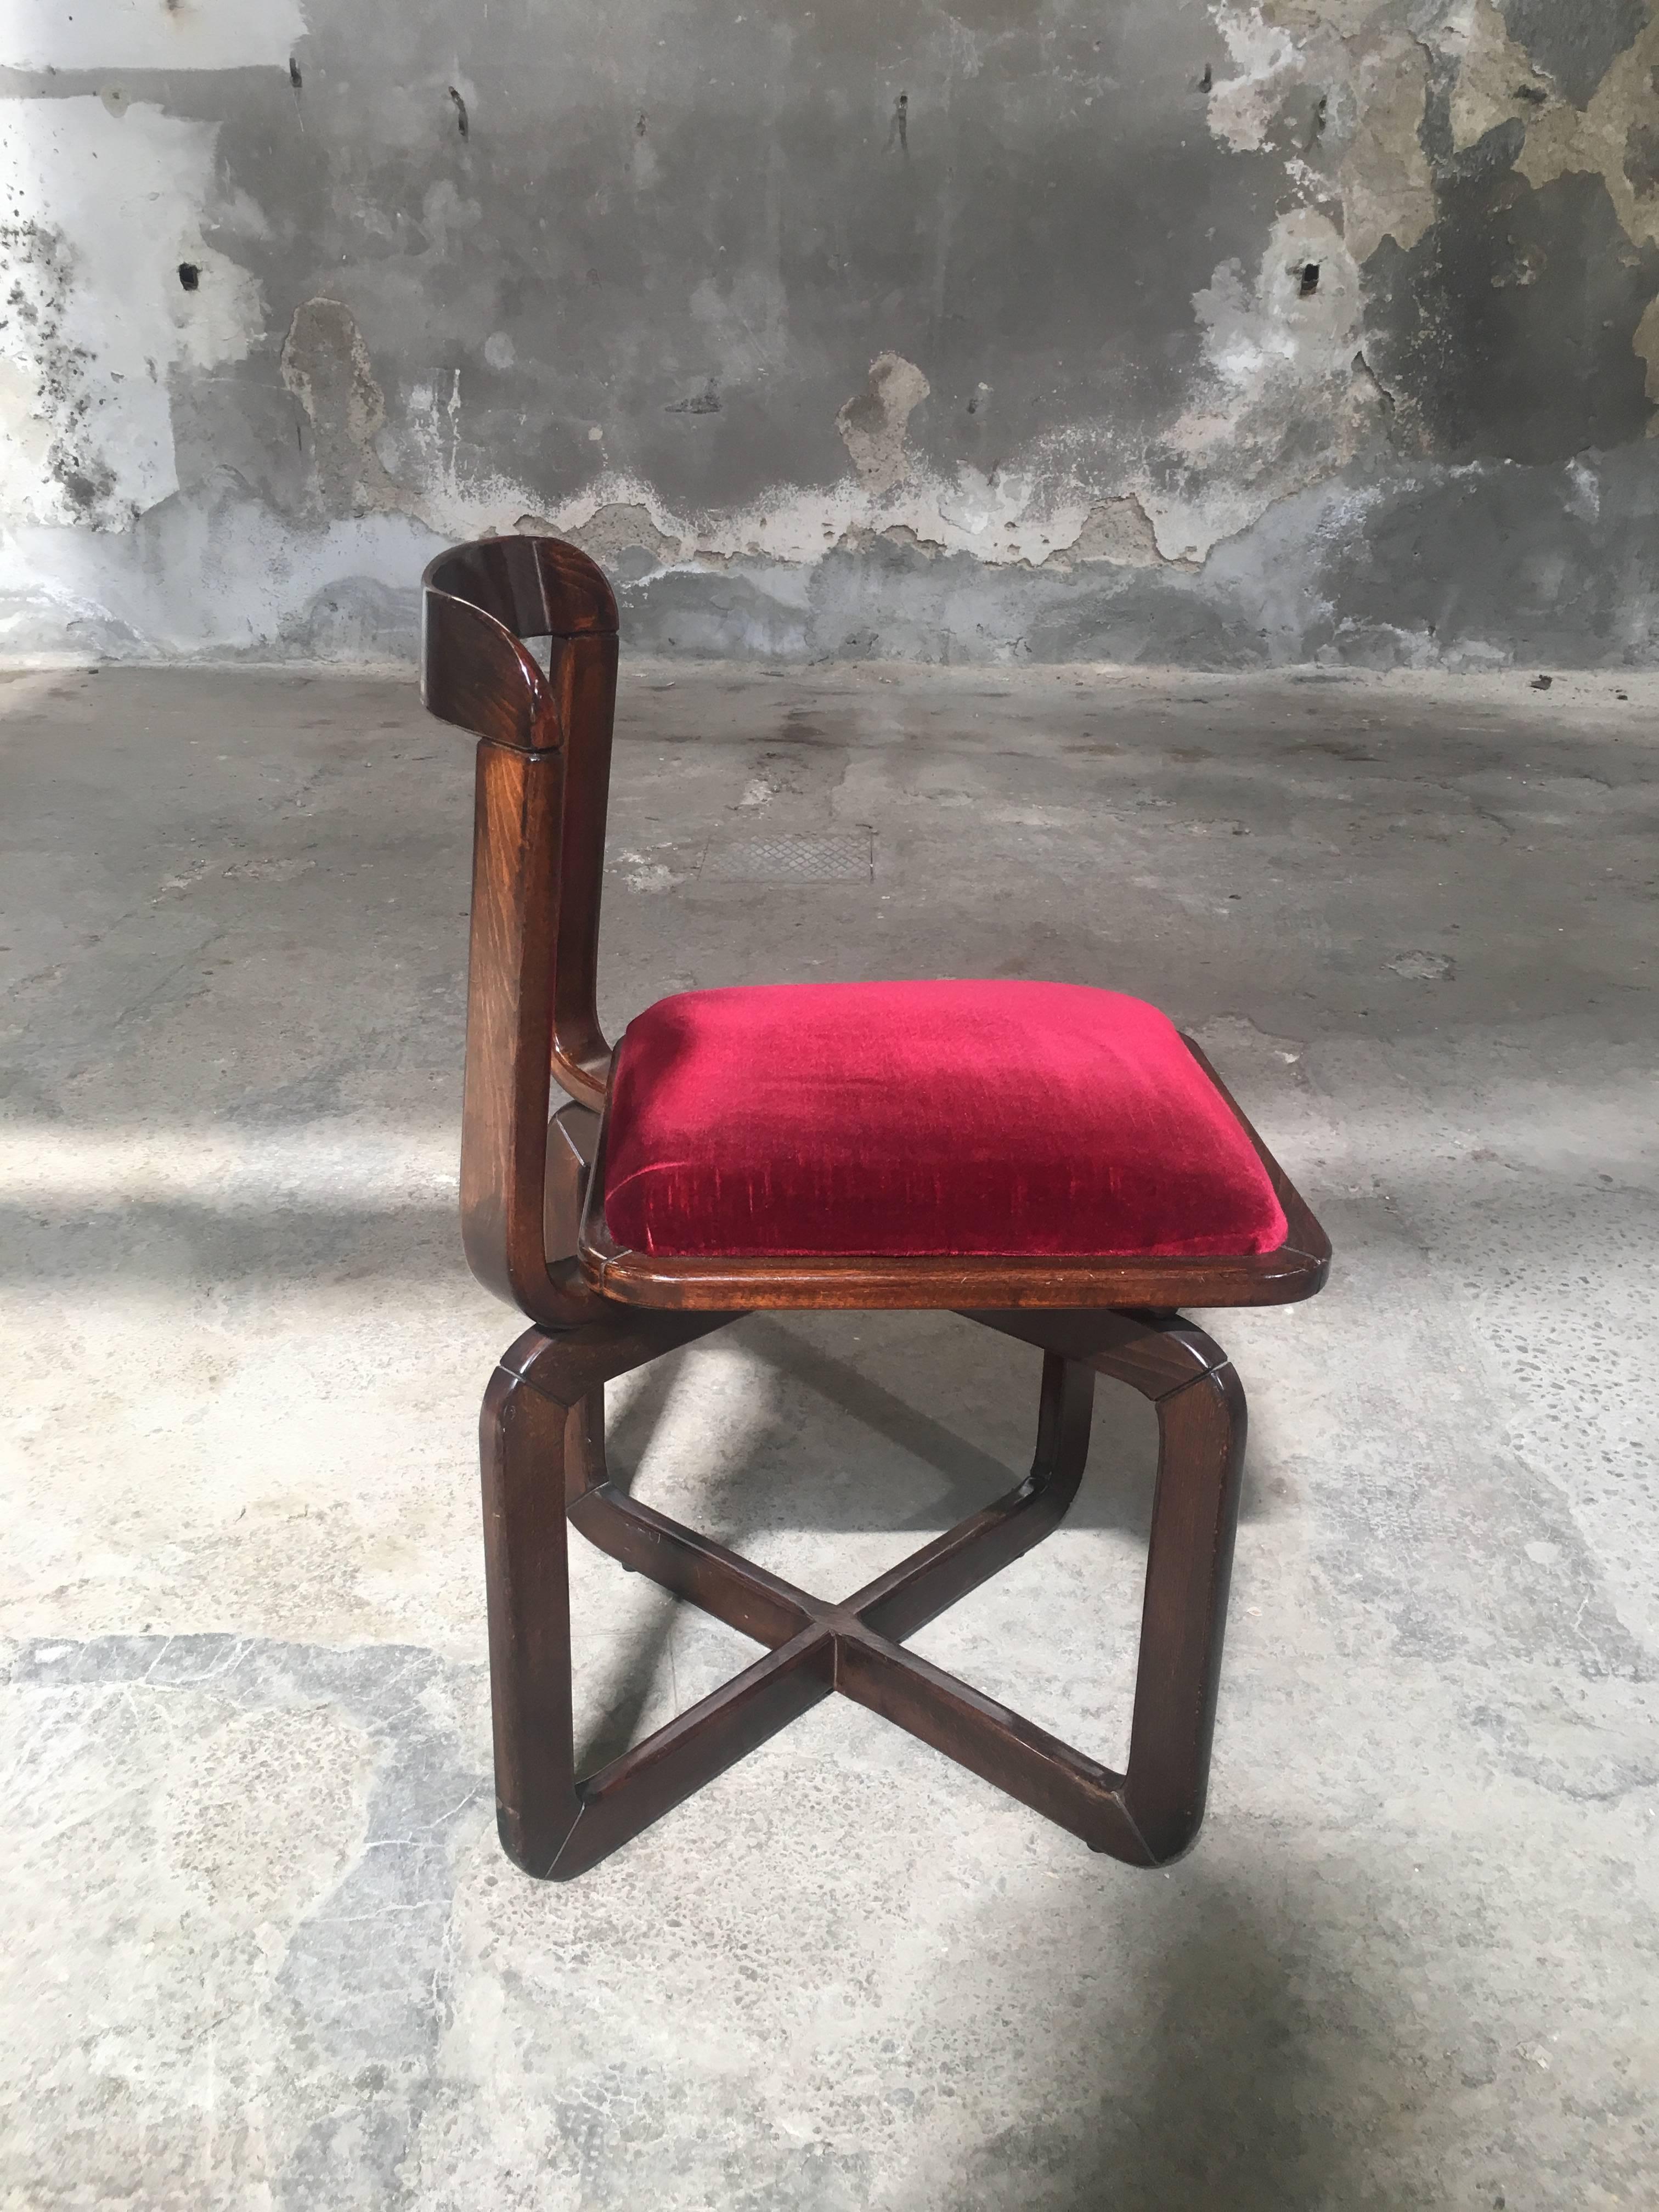 Set of four Italian side or dining chairs in chestnut wood with original burgundy velvet fabric.
The chairs are made in Italy during 1970s in the style of Willy Rizzo.
These chairs are really comfortable and in very good conditions.